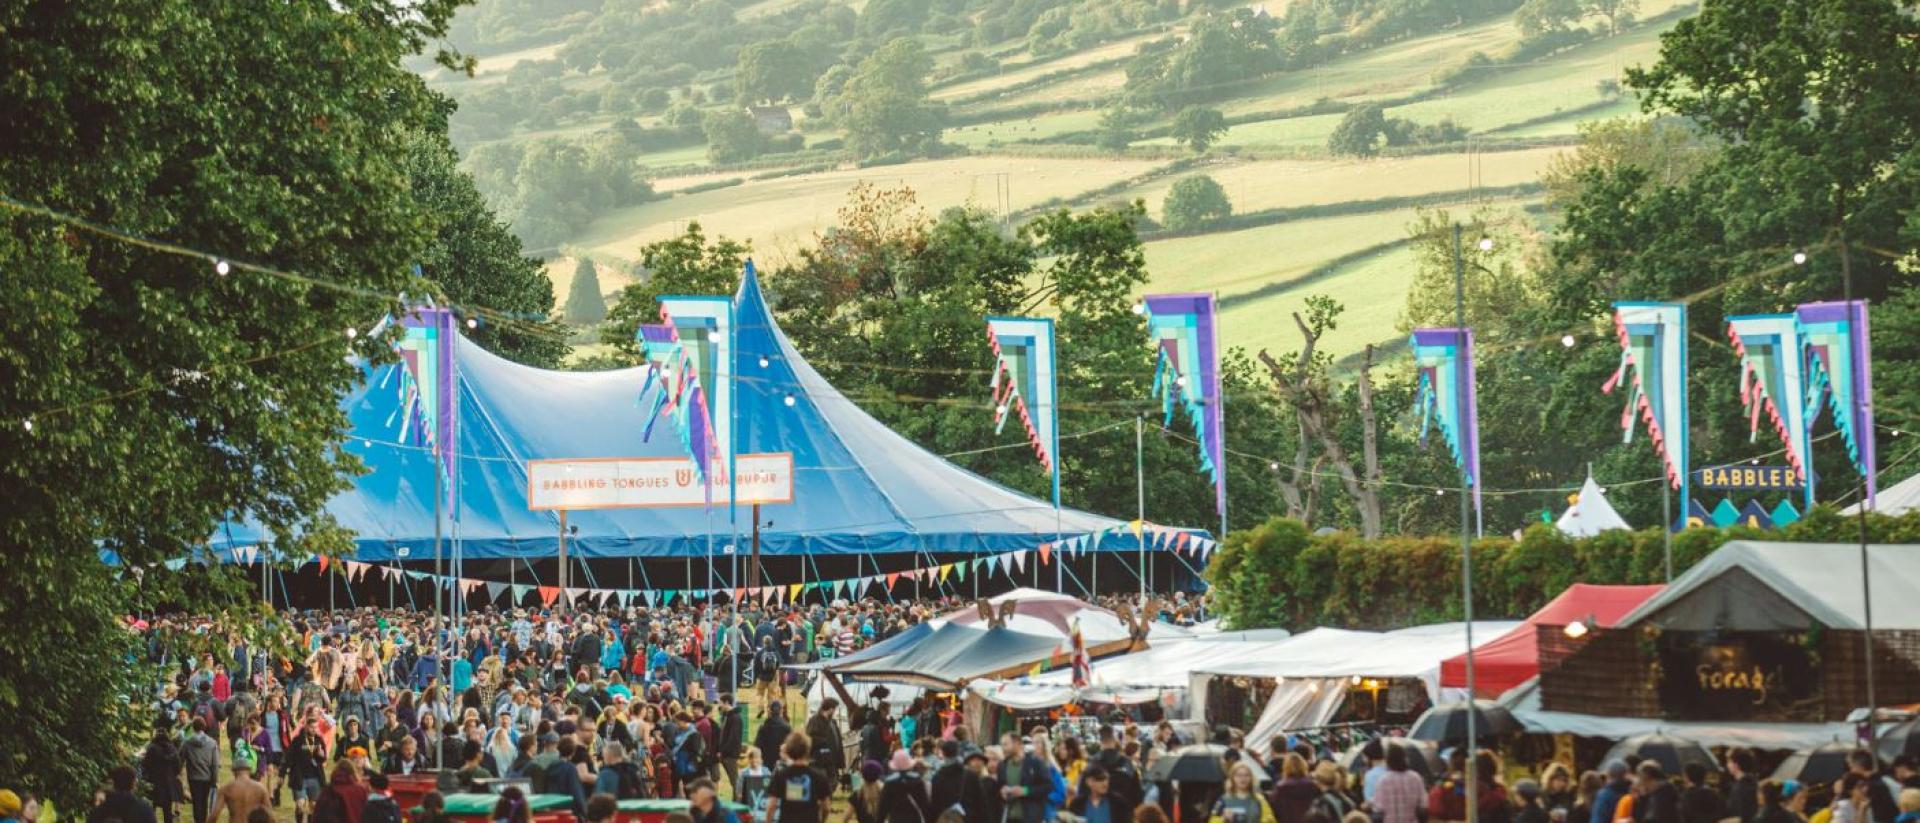 photo from green man festival with lots of people standing in front of a large blue tent. There are trees on a hill in the background.